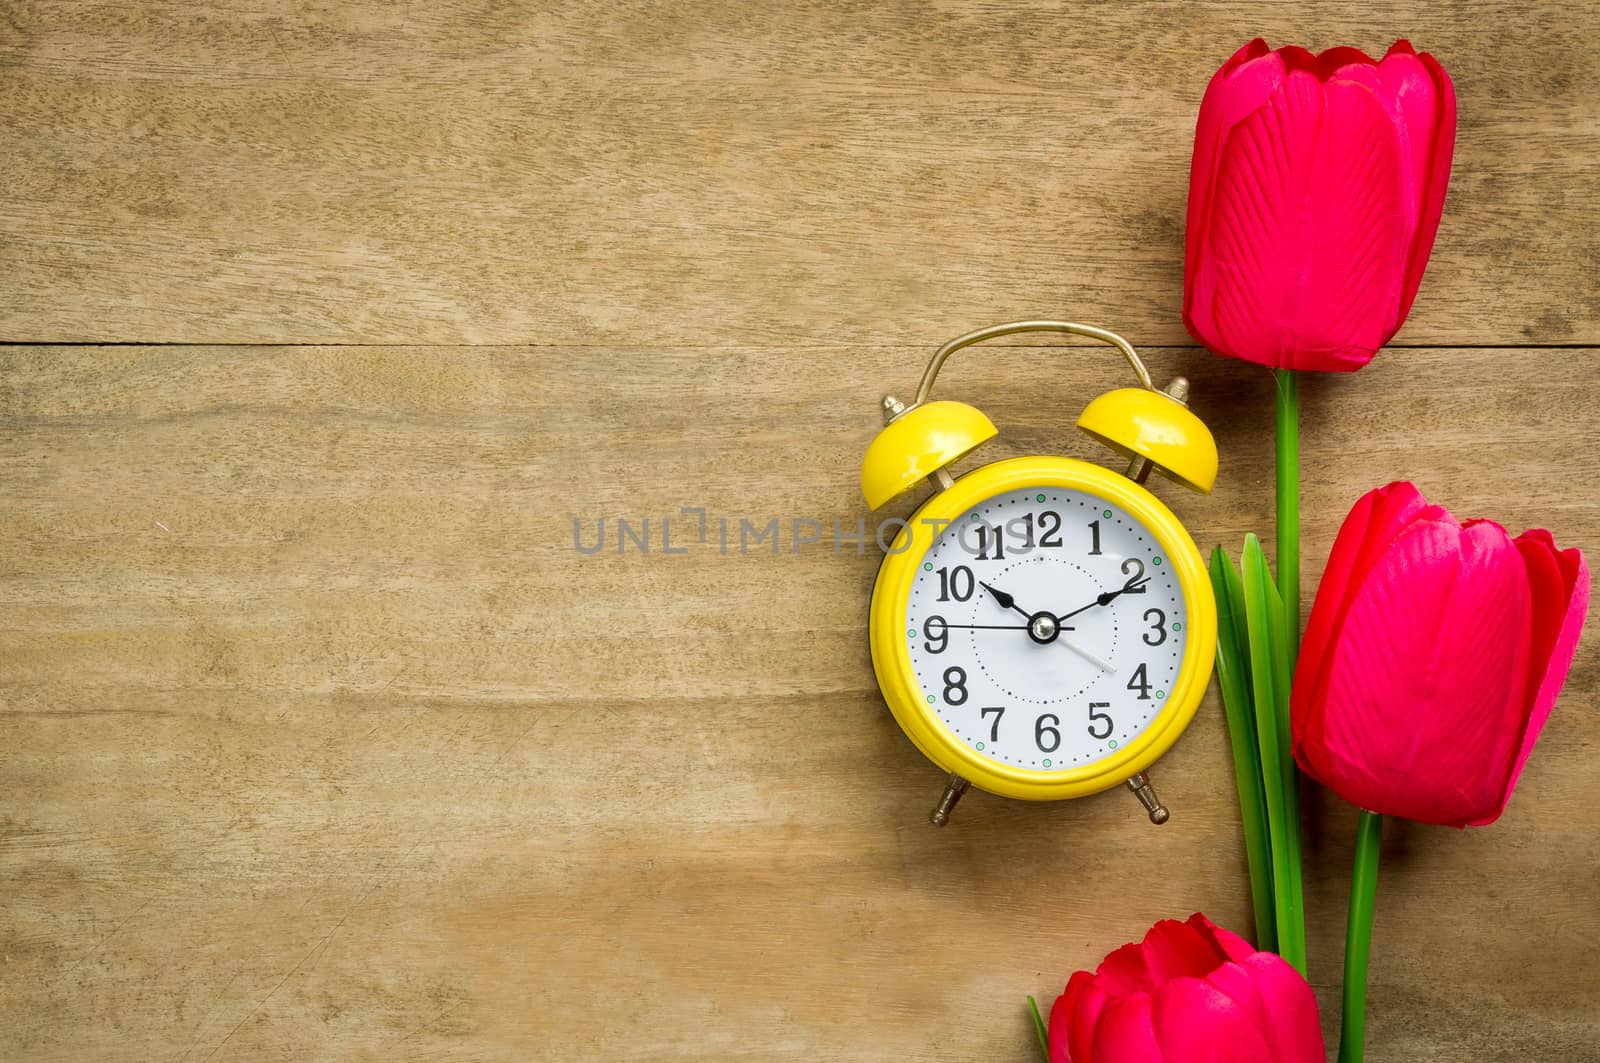 Clock nad tulips on wooden table. by seksan44